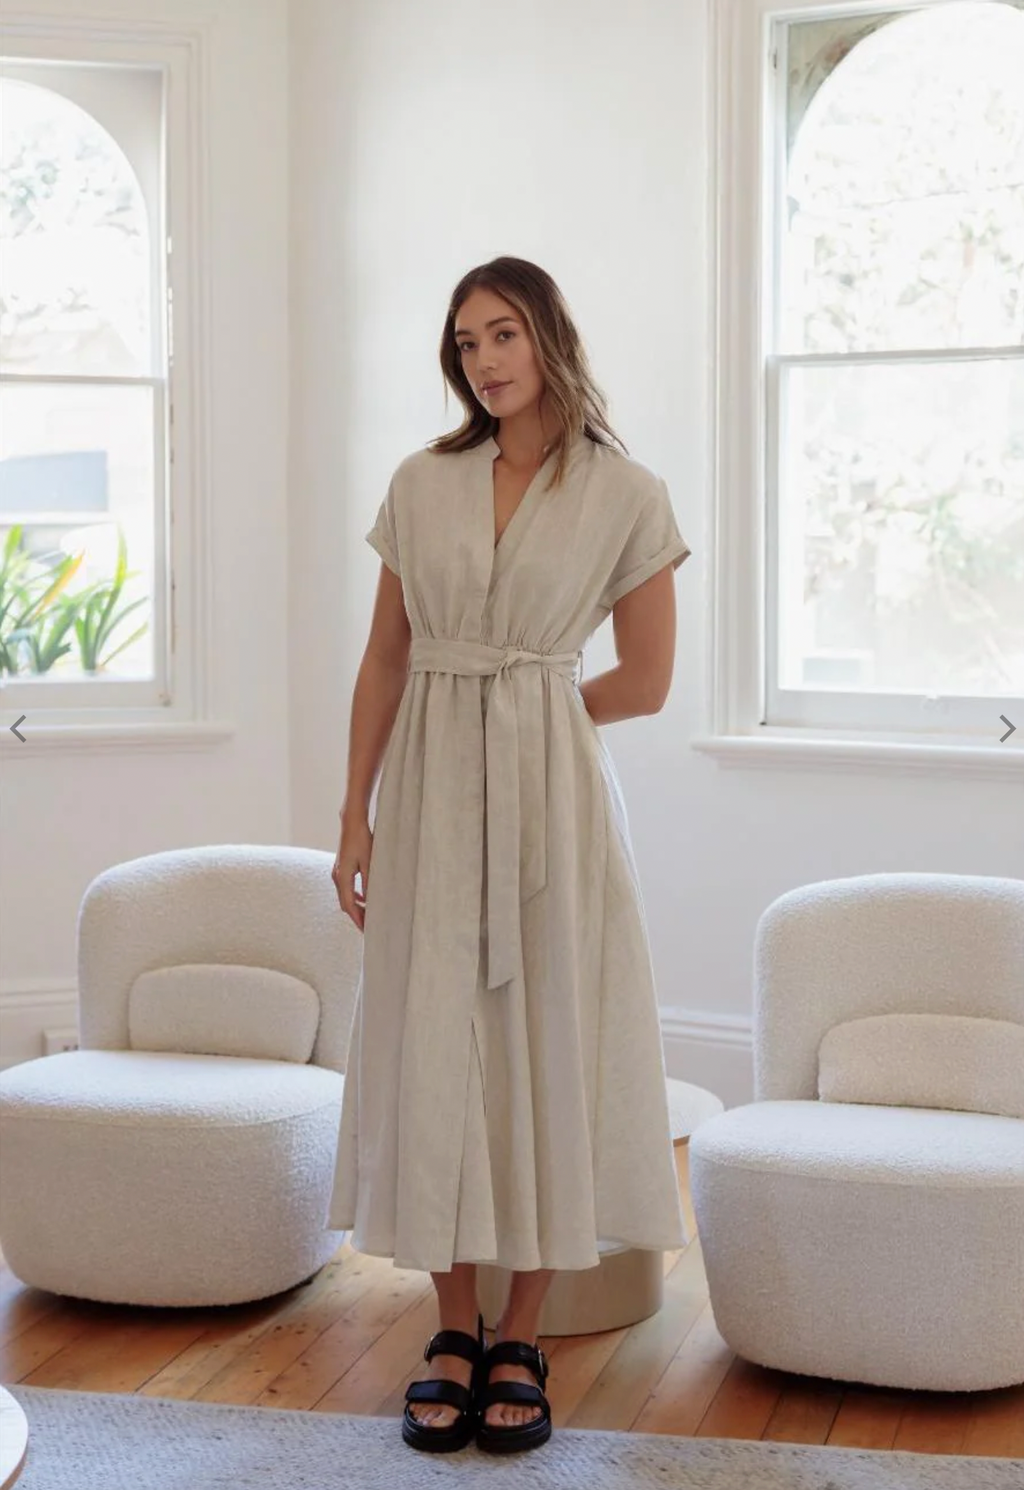 the occasions dress by little lies is a long linen flattering dress with elastic waist